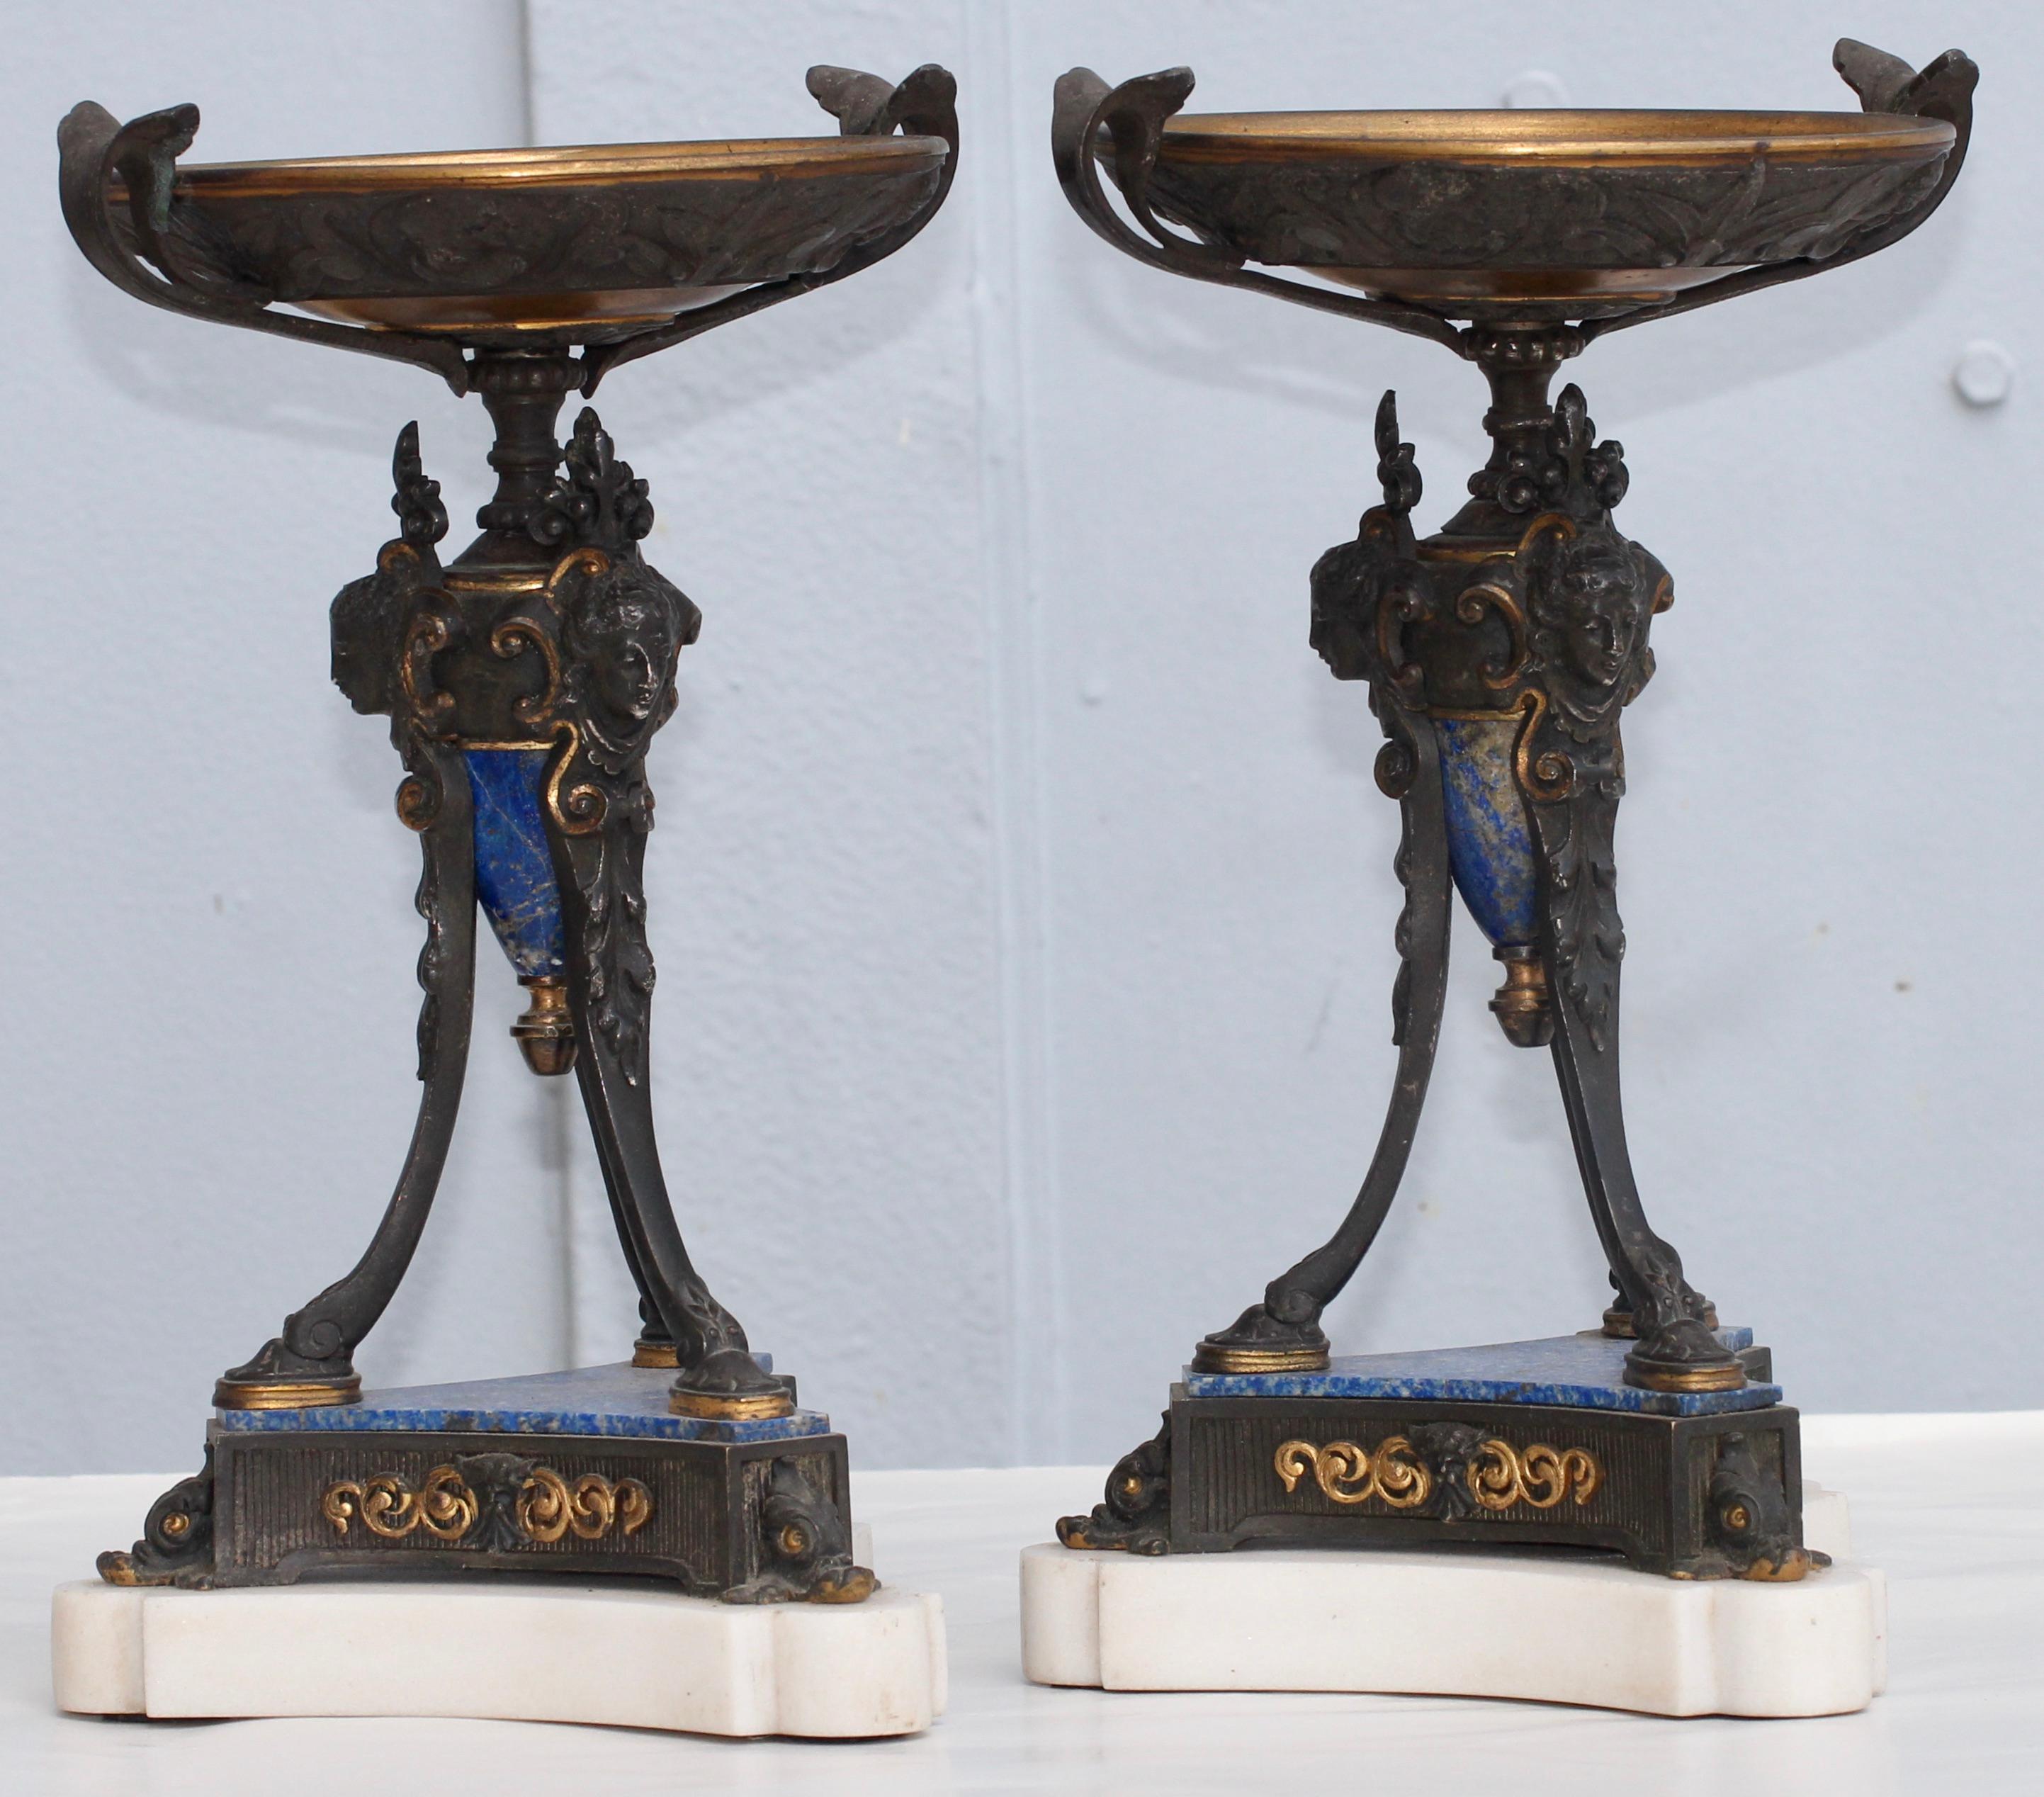 Neoclassical Revival French 19th Century Pair of Tazzas